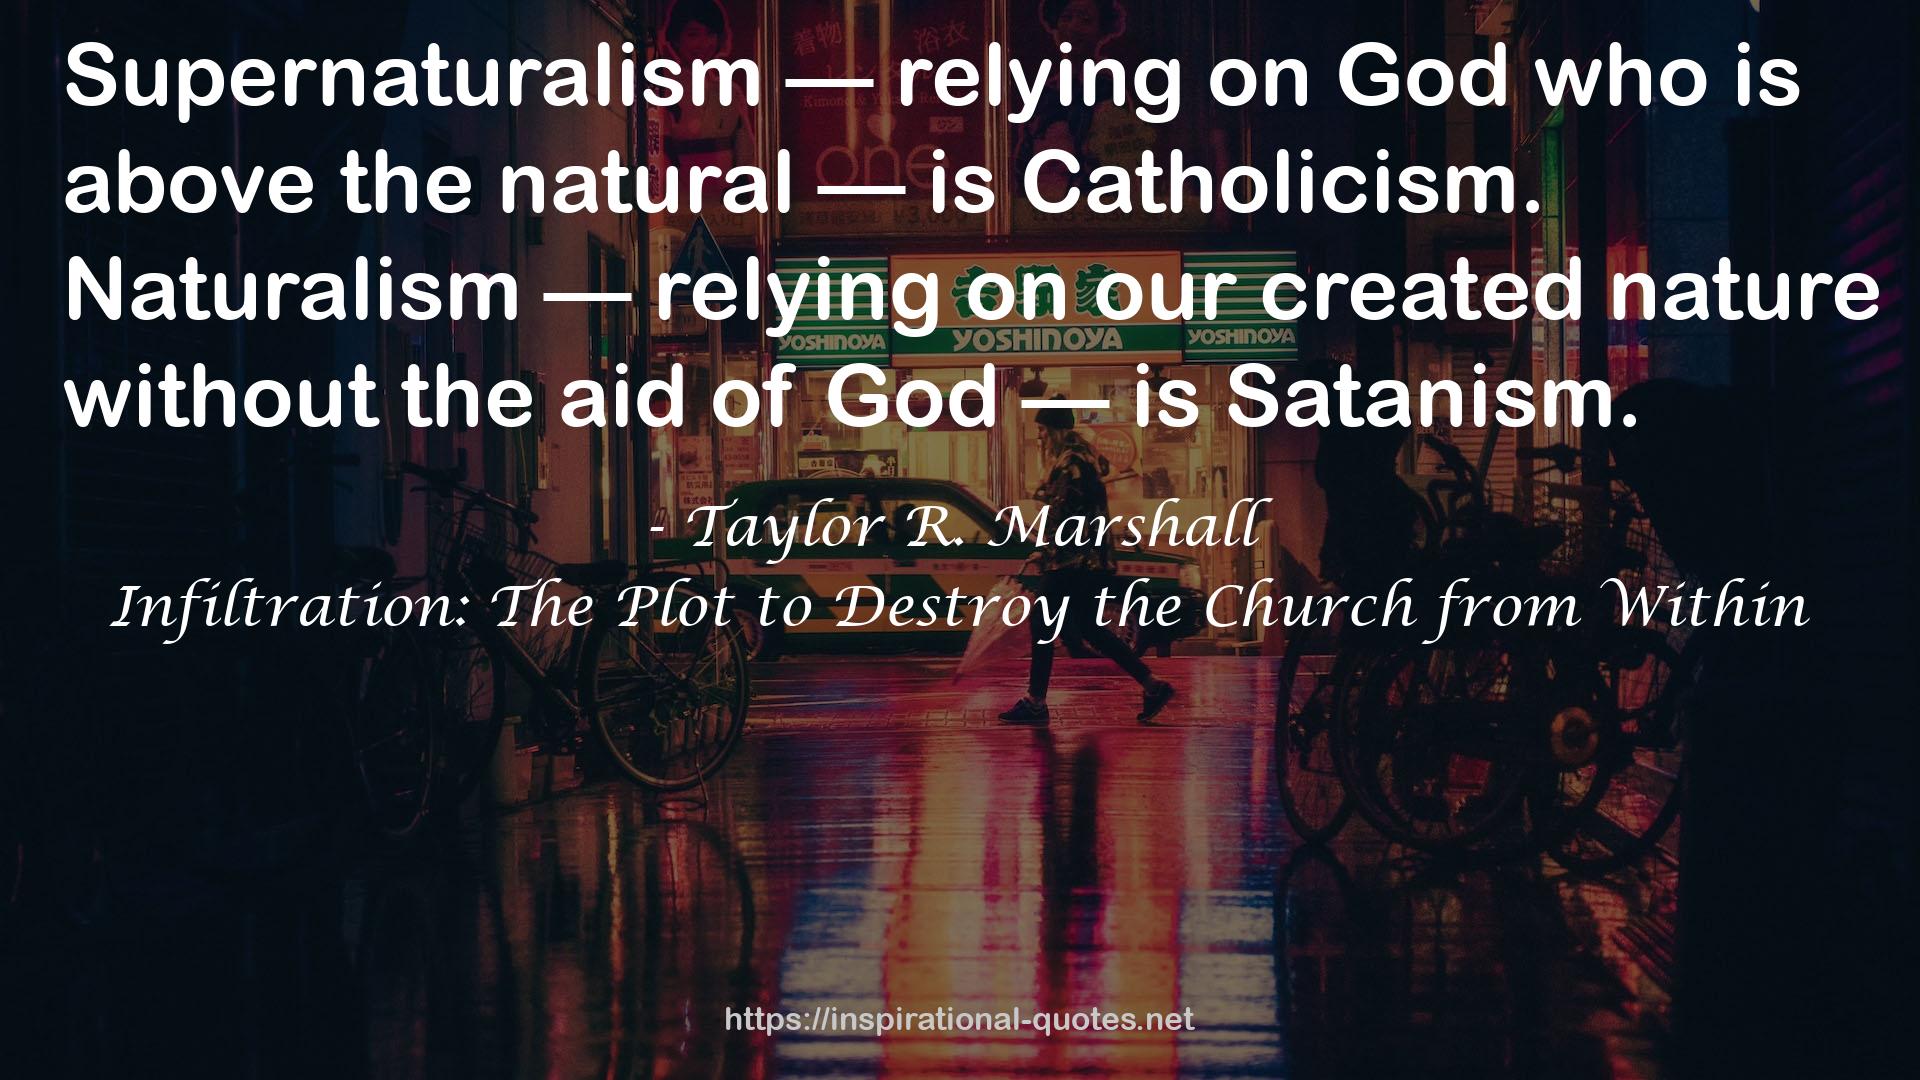 Infiltration: The Plot to Destroy the Church from Within QUOTES